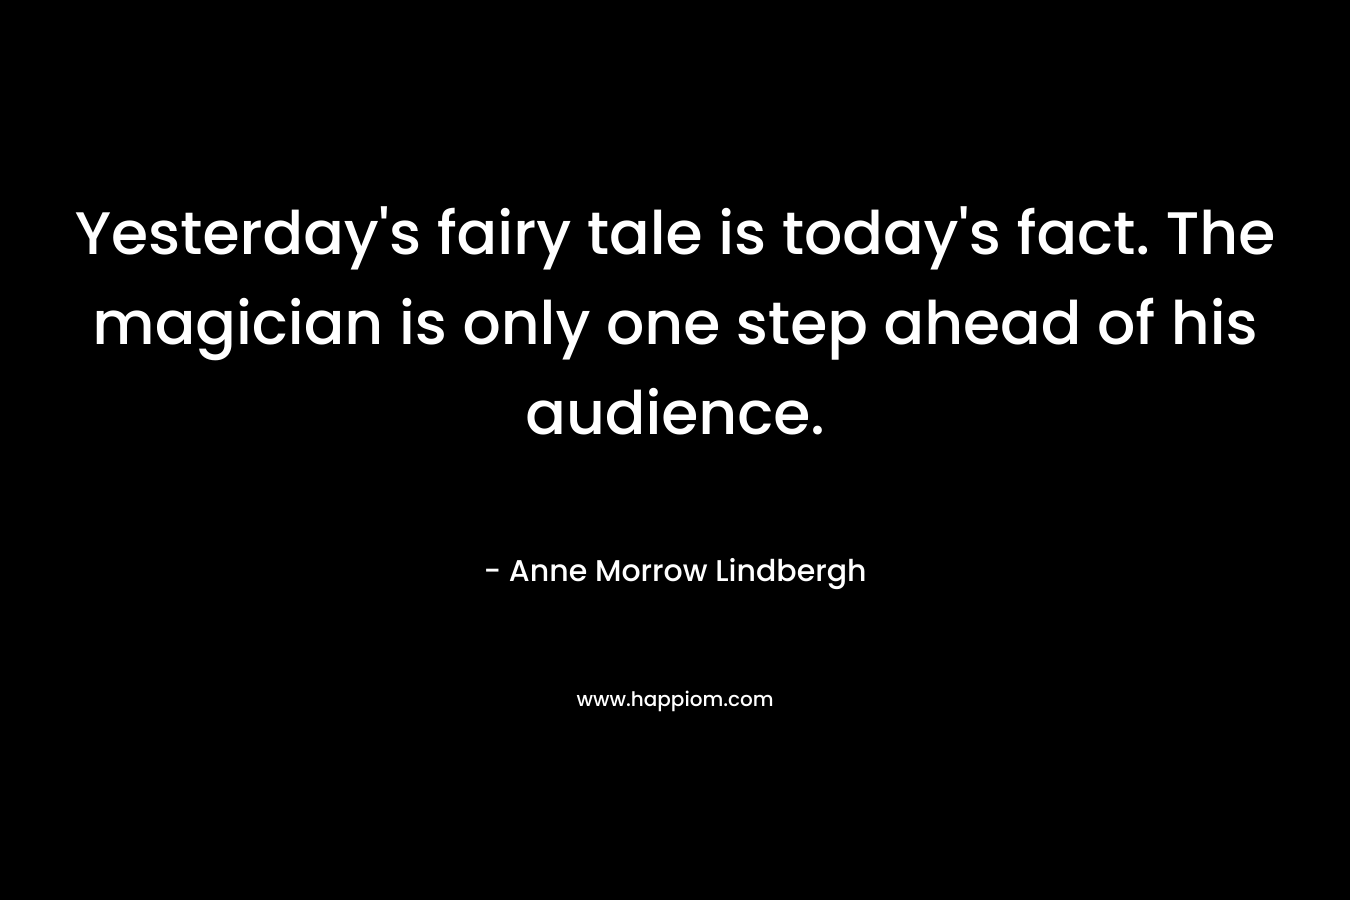 Yesterday's fairy tale is today's fact. The magician is only one step ahead of his audience.